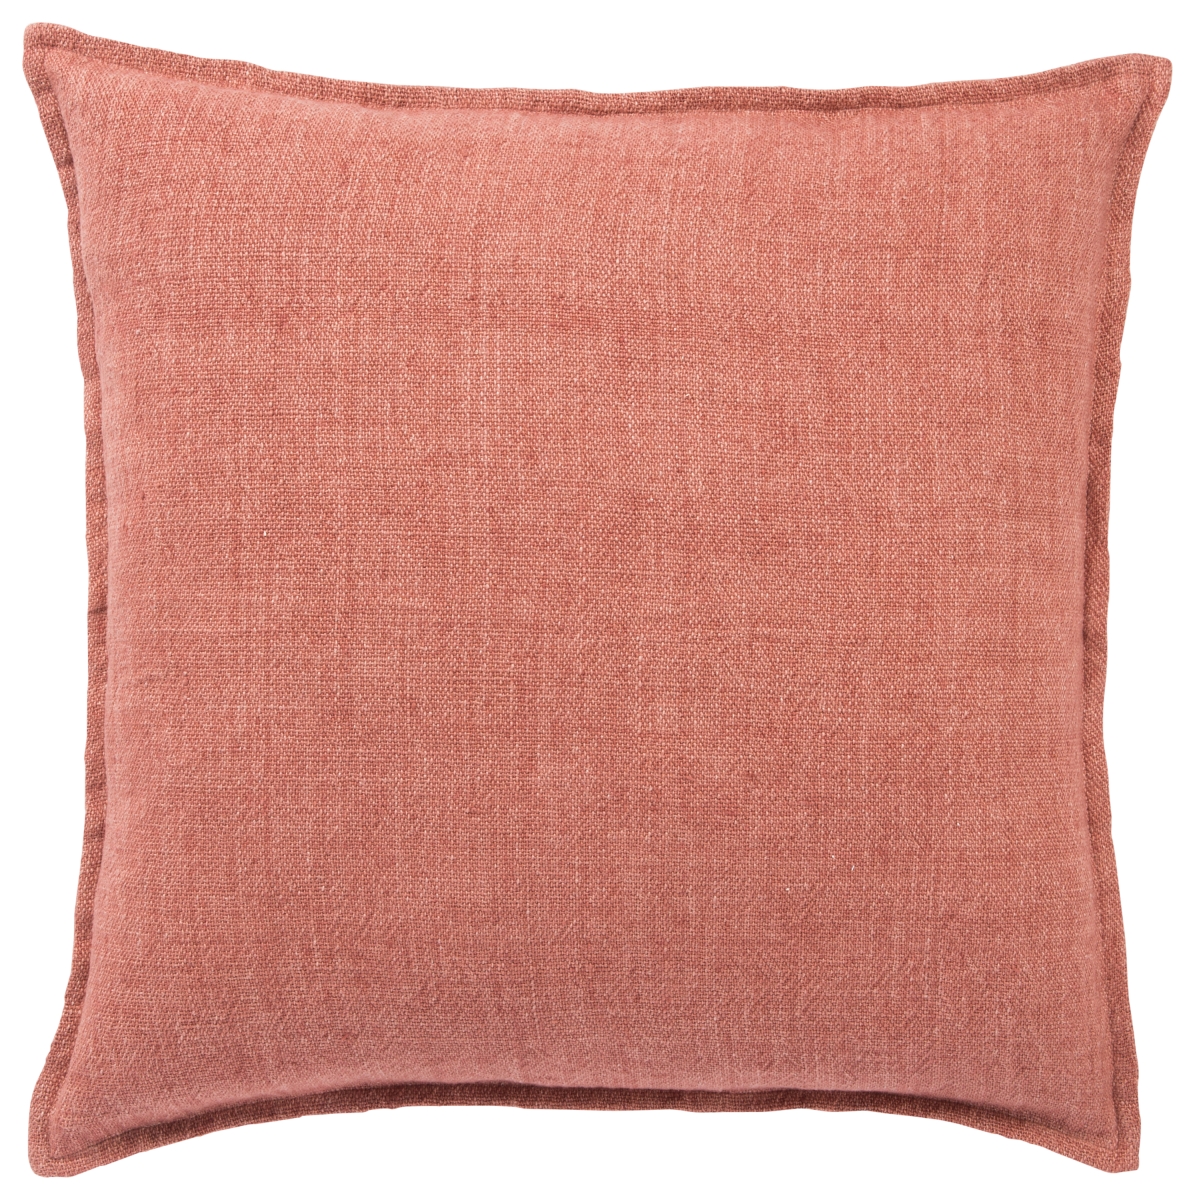 Plw103296 22 X 22 In. Burbank Blanche Solid Red Poly Throw Pillow